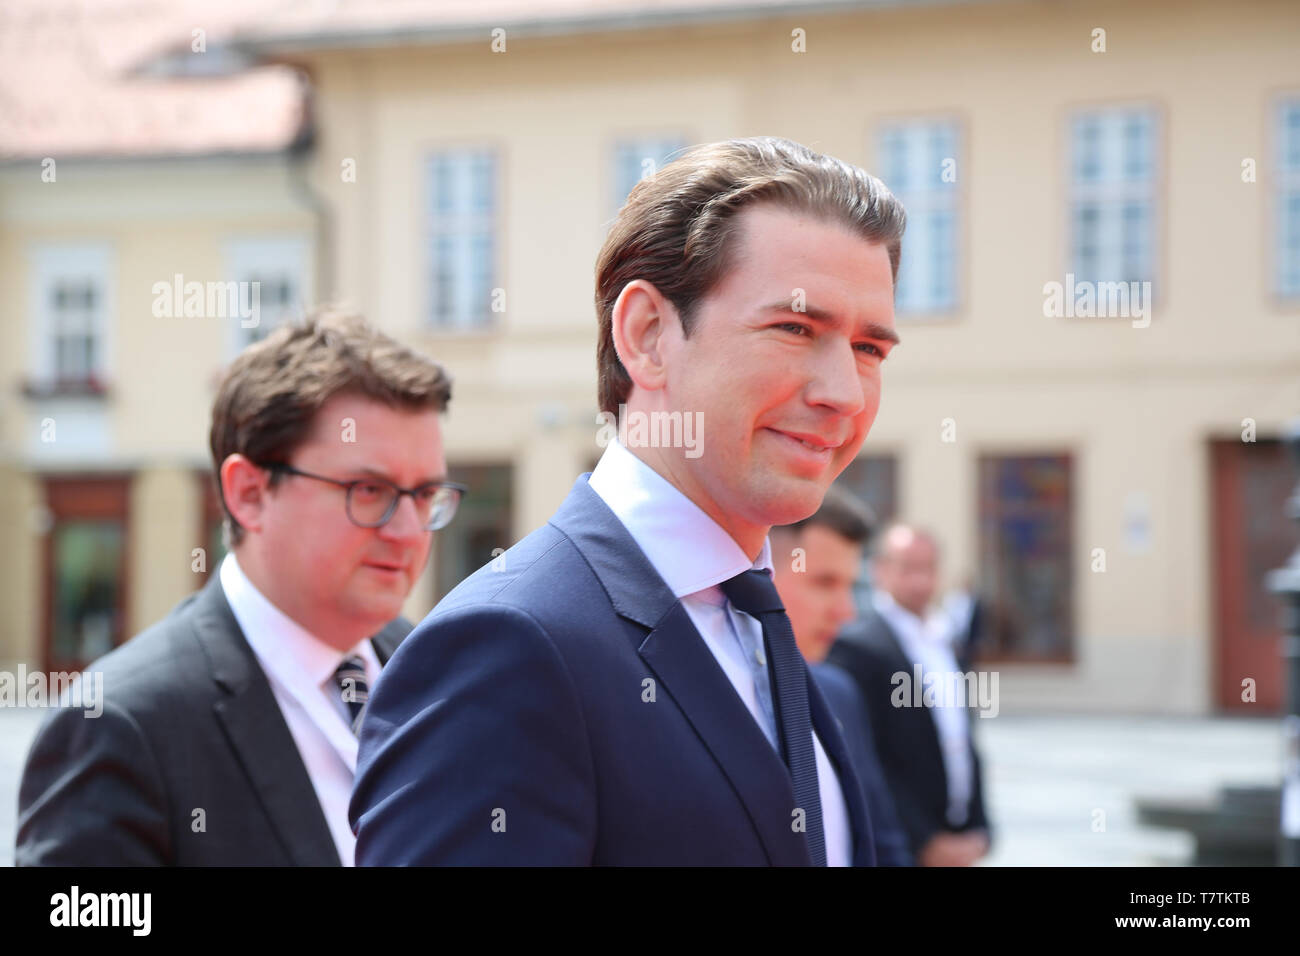 Sibiu, Romania. 9th May, 2019. Austrian Chancellor Sebastian Kurz arrives in the Grand Square in front of the Sibiu City Hall to attend the European Union (EU) informal summit in Sibiu, Romania, May 9, 2019. The leaders of the EU member states on Thursday agreed on defending 'one Europe' and upholding the rules-based international order in their '10 commitments' declaration, made at an informal summit in Sibiu. Credit: Chen Jin/Xinhua/Alamy Live News Stock Photo